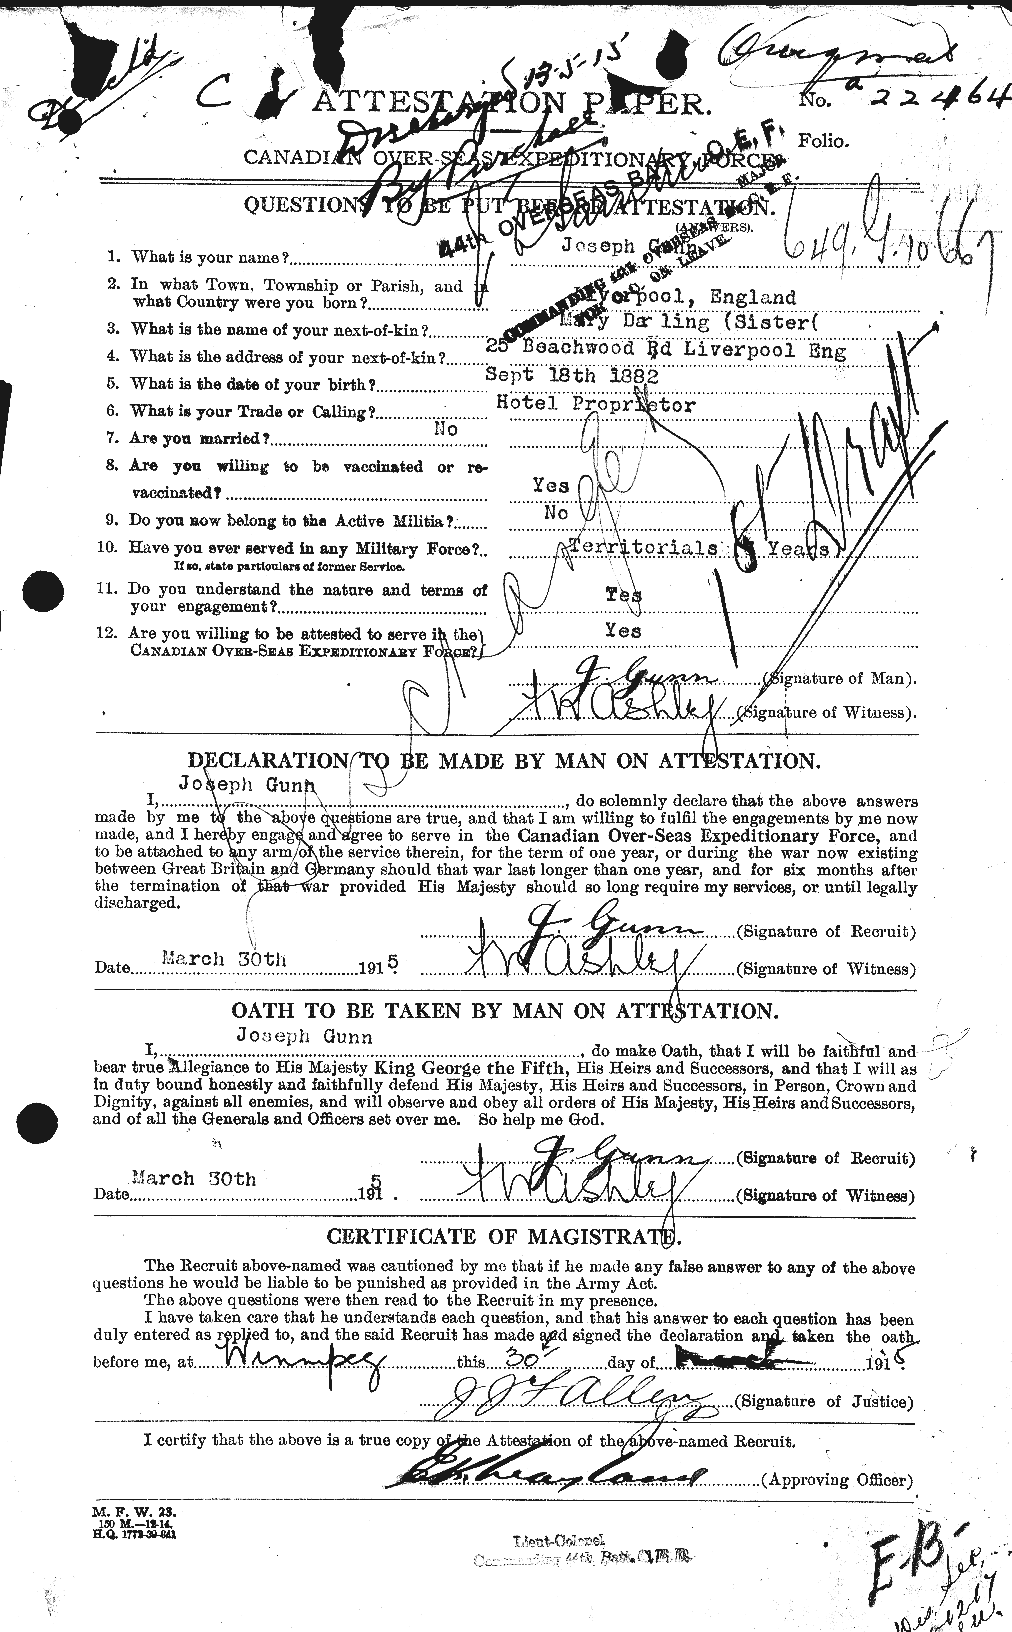 Personnel Records of the First World War - CEF 369306a